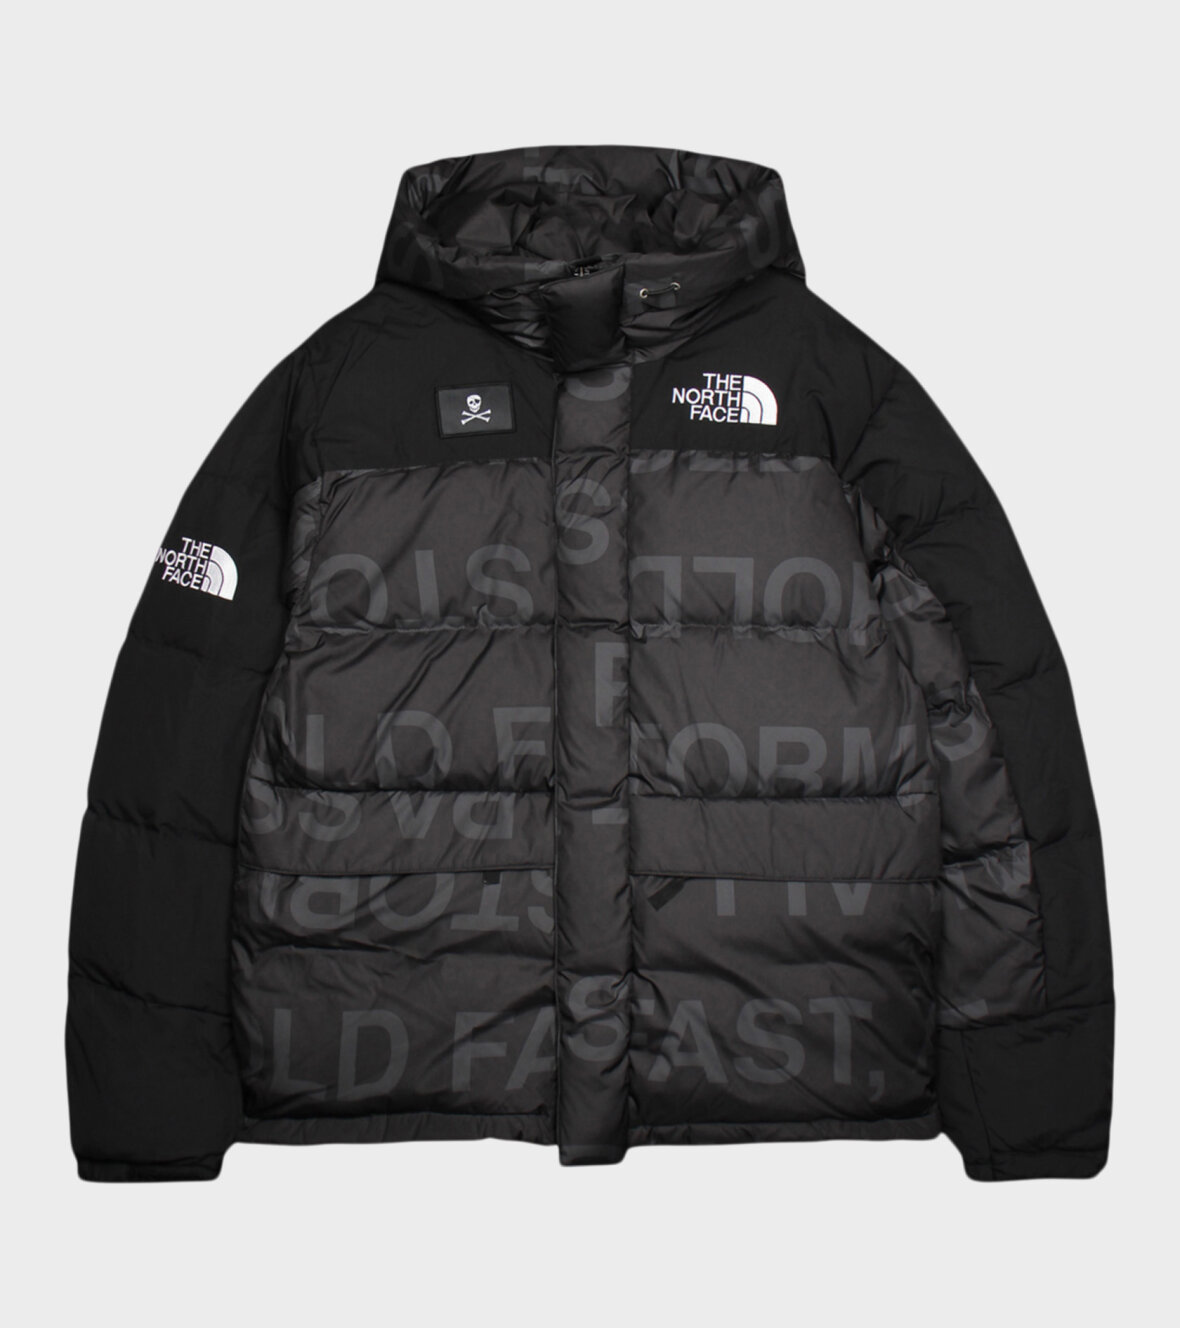 dr. - The North Face Down Jacket Black